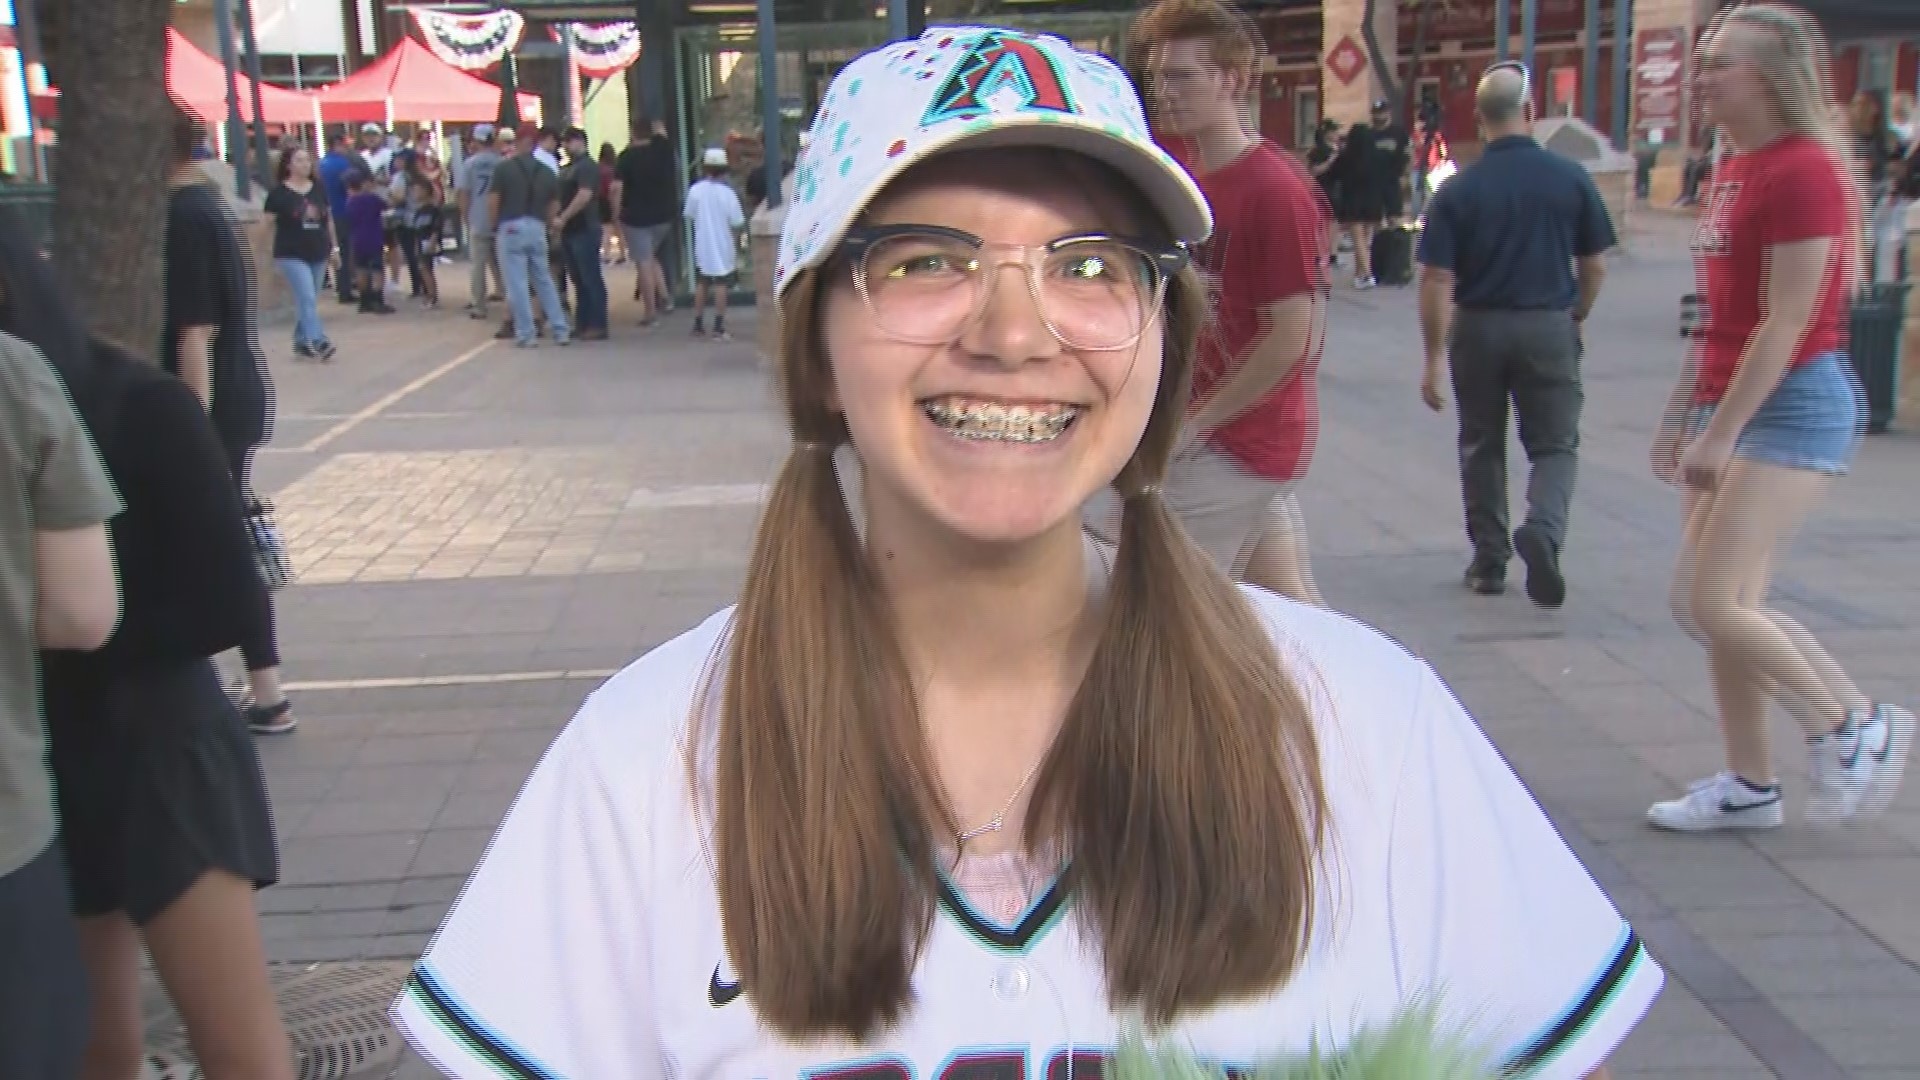 D-backs fan, Hannah, offered to read the starting lineup for the Arizona Diamondbacks ahead of Game 3 against L.A.